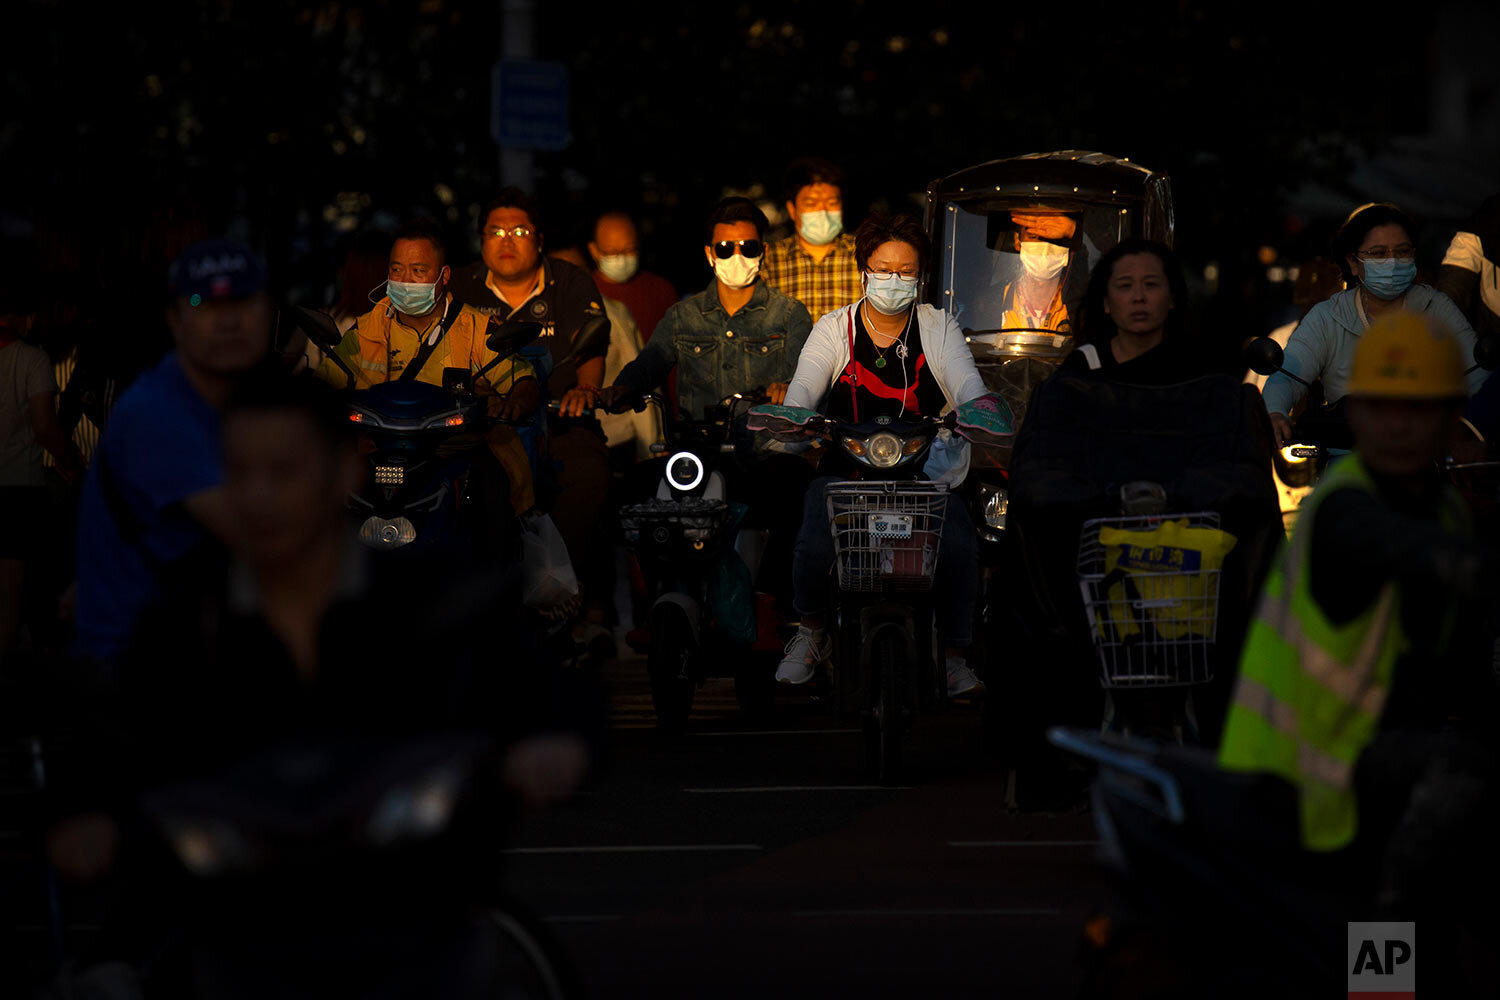  People wearing face masks to protect against the coronavirus cross an intersection in Beijing, Wednesday, Sept. 16, 2020. (AP Photo/Mark Schiefelbein) 